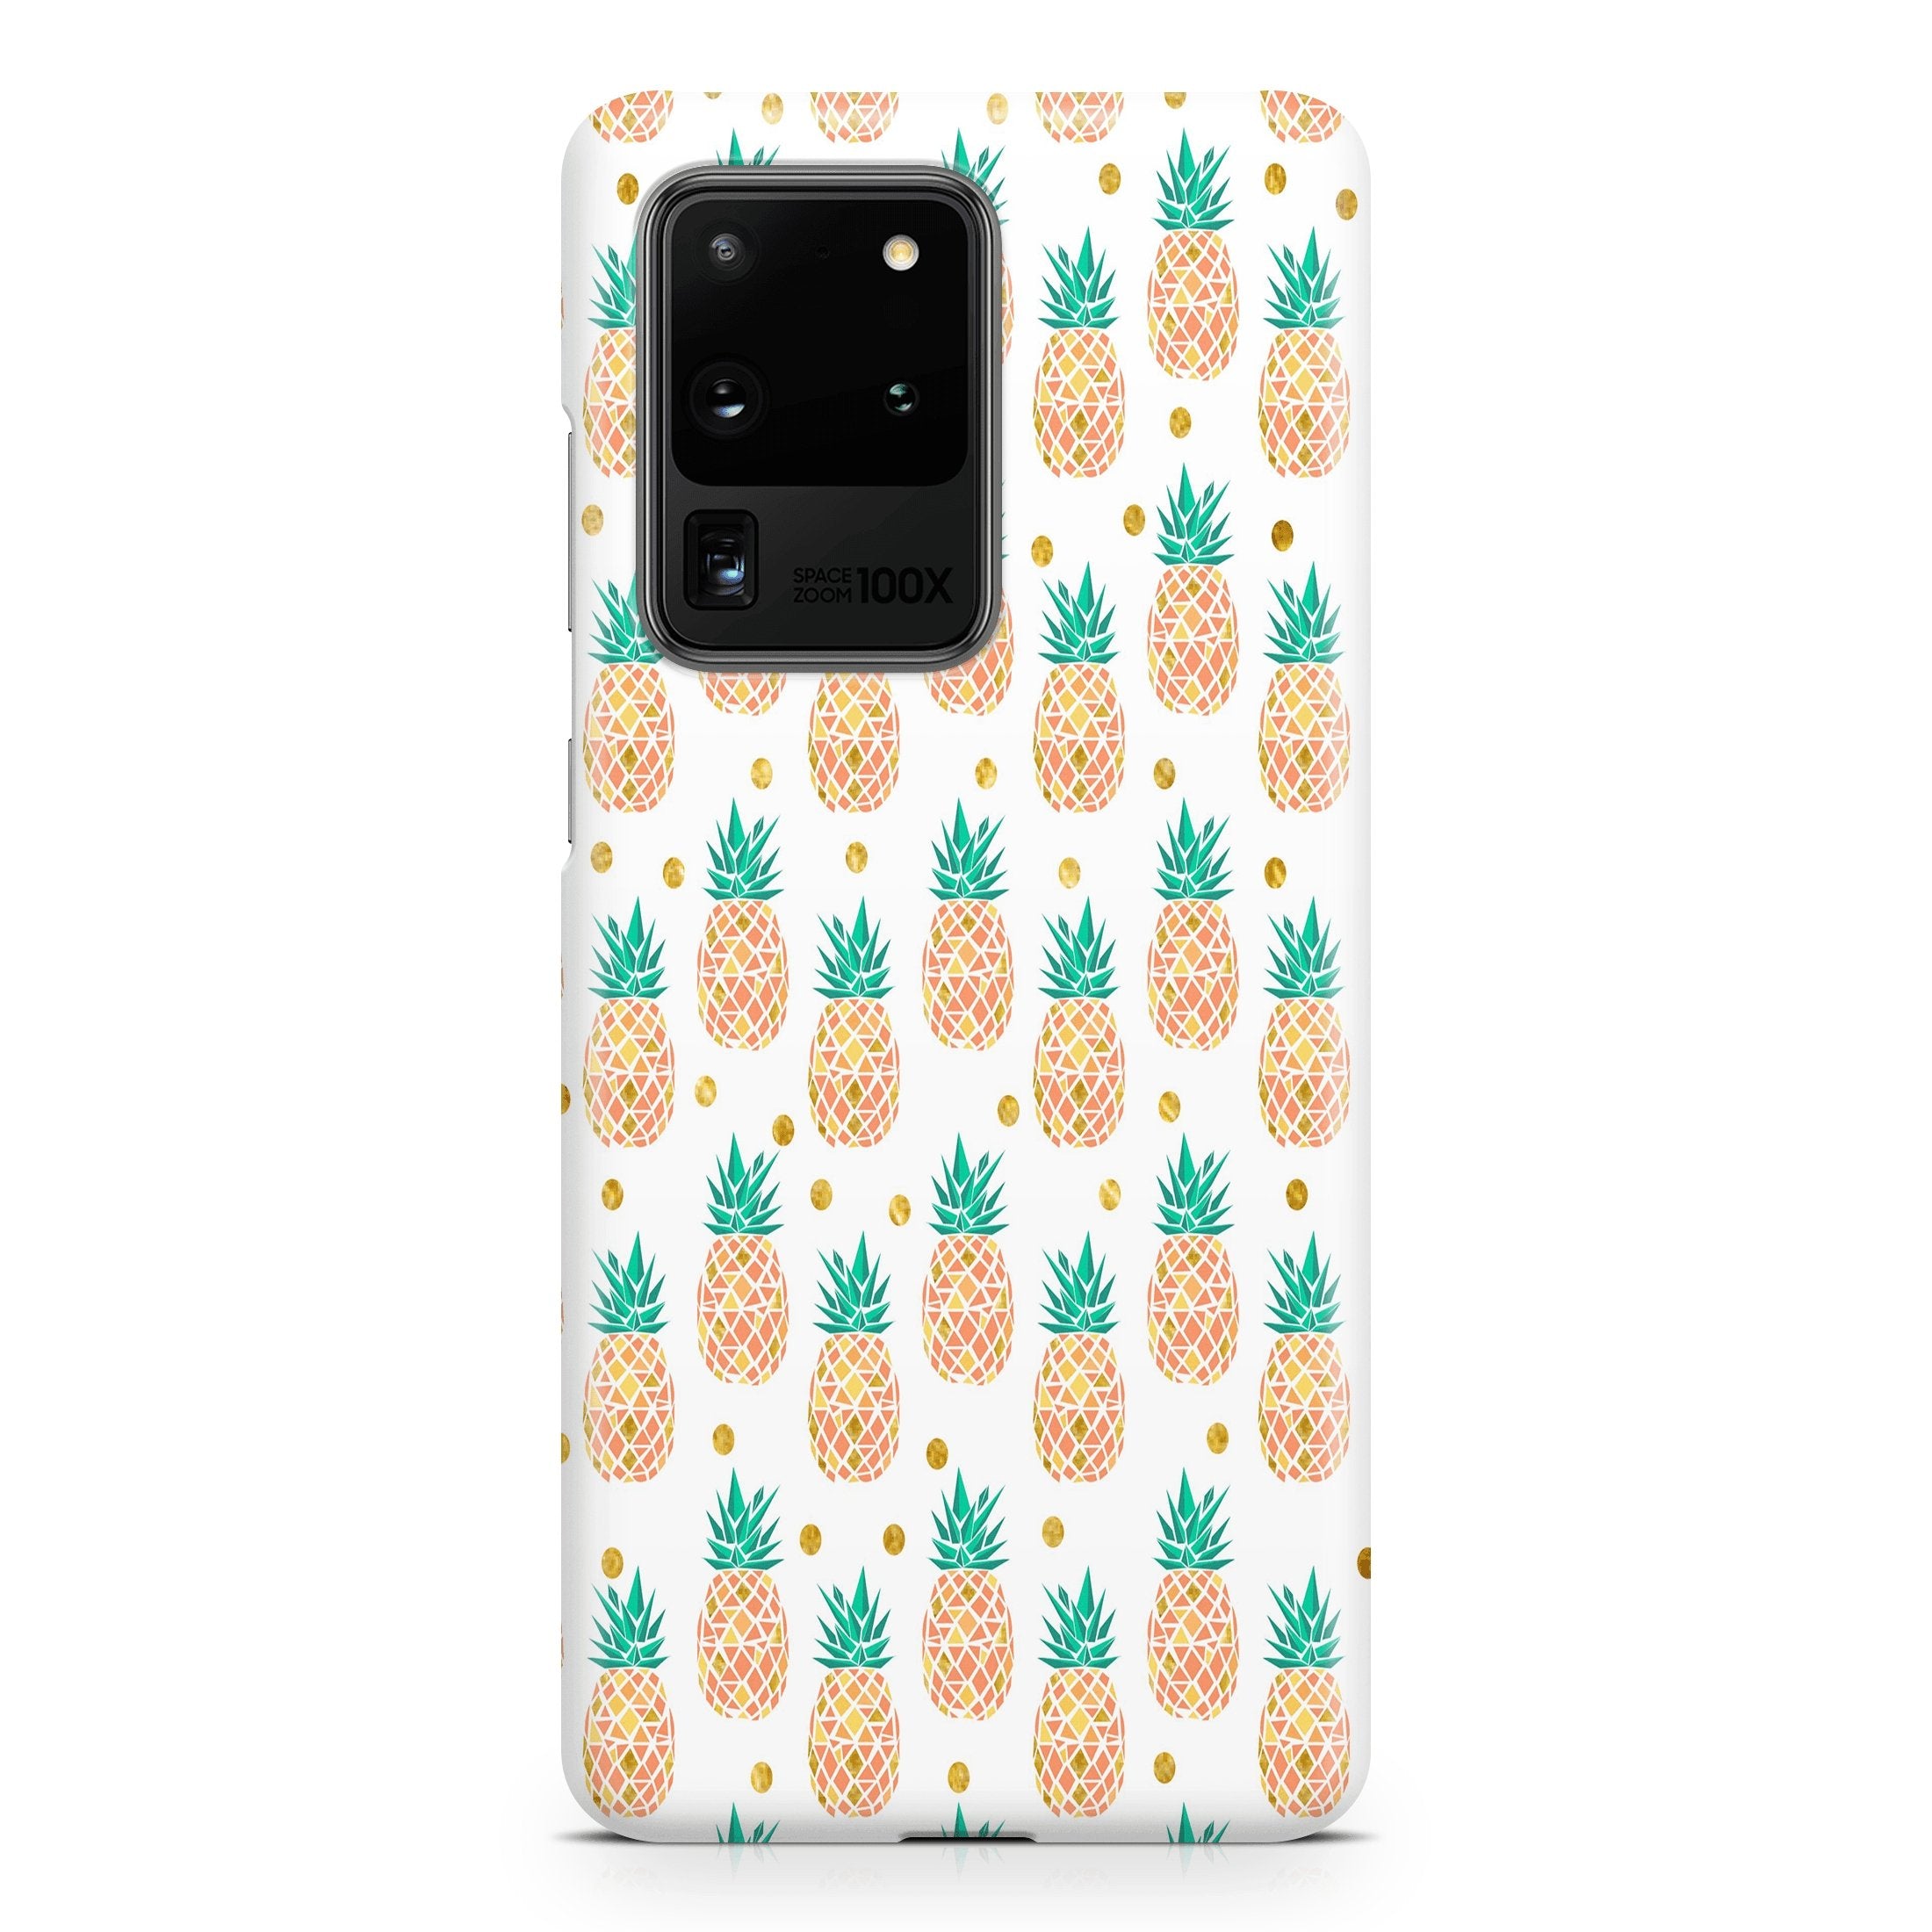 Pineapple Pineapple - Samsung phone case designs by CaseSwagger